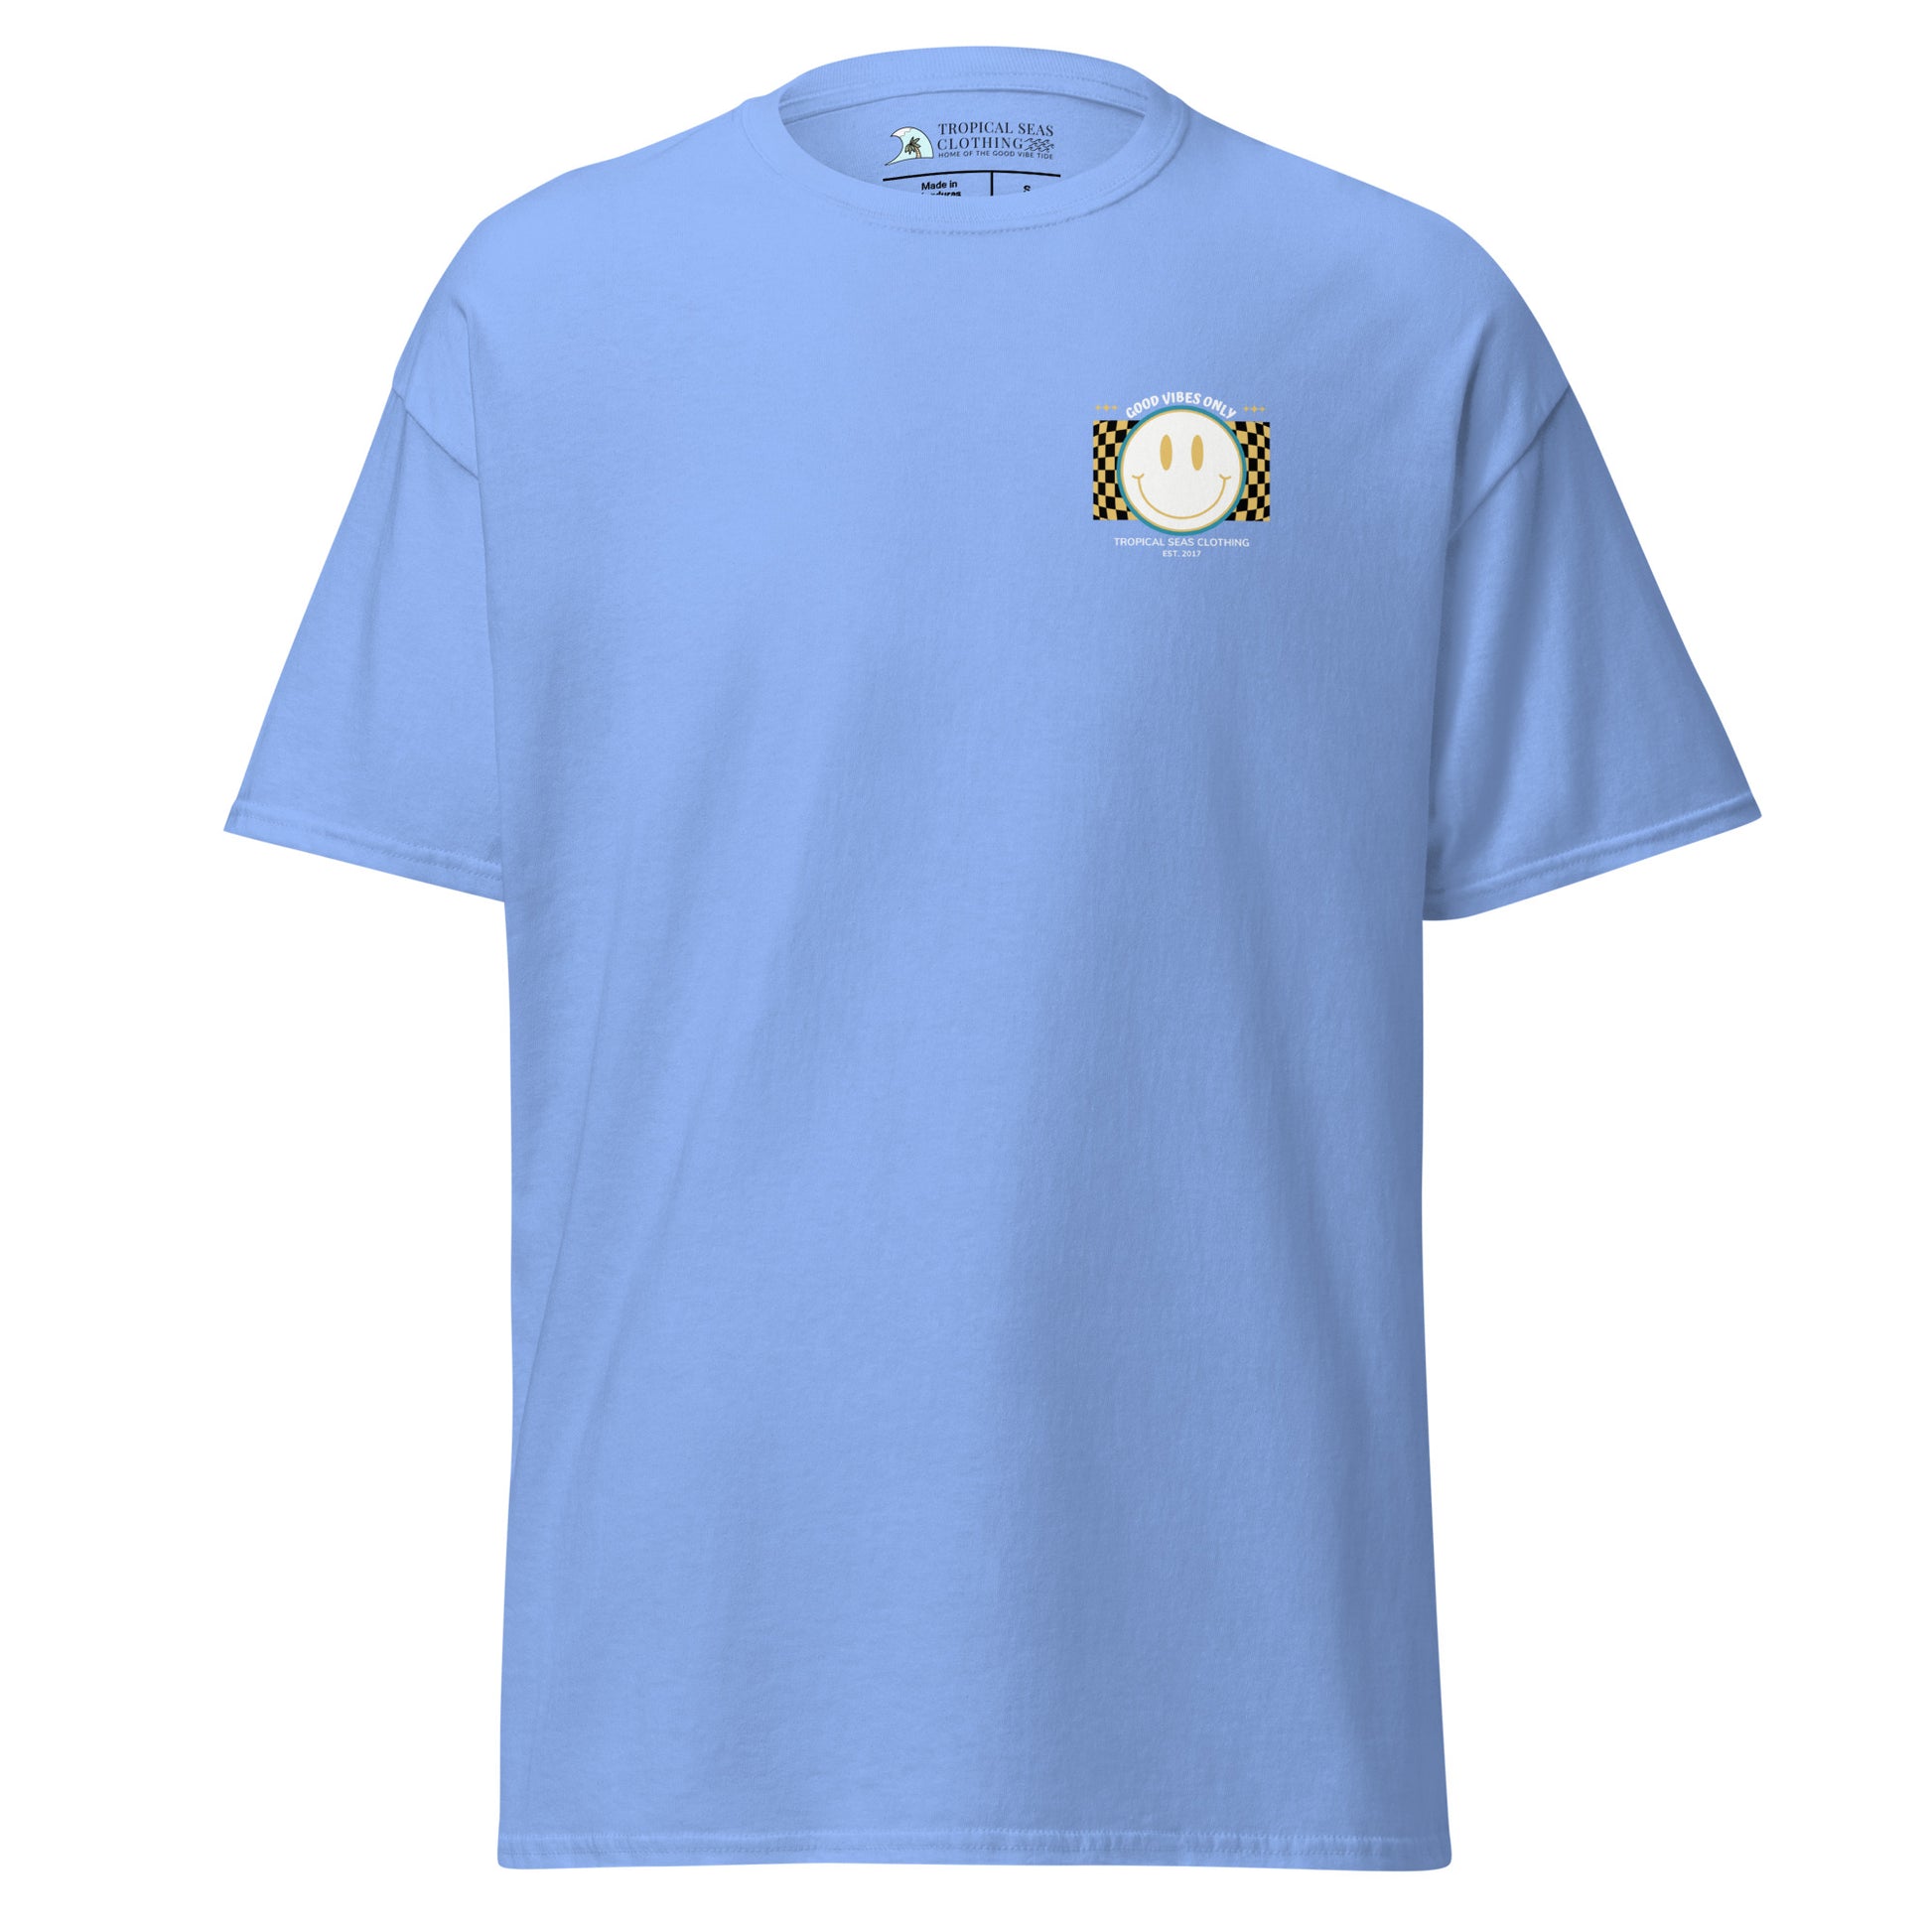 Men's Good Vibes Smiley Face classic tee - Tropical Seas Clothing 